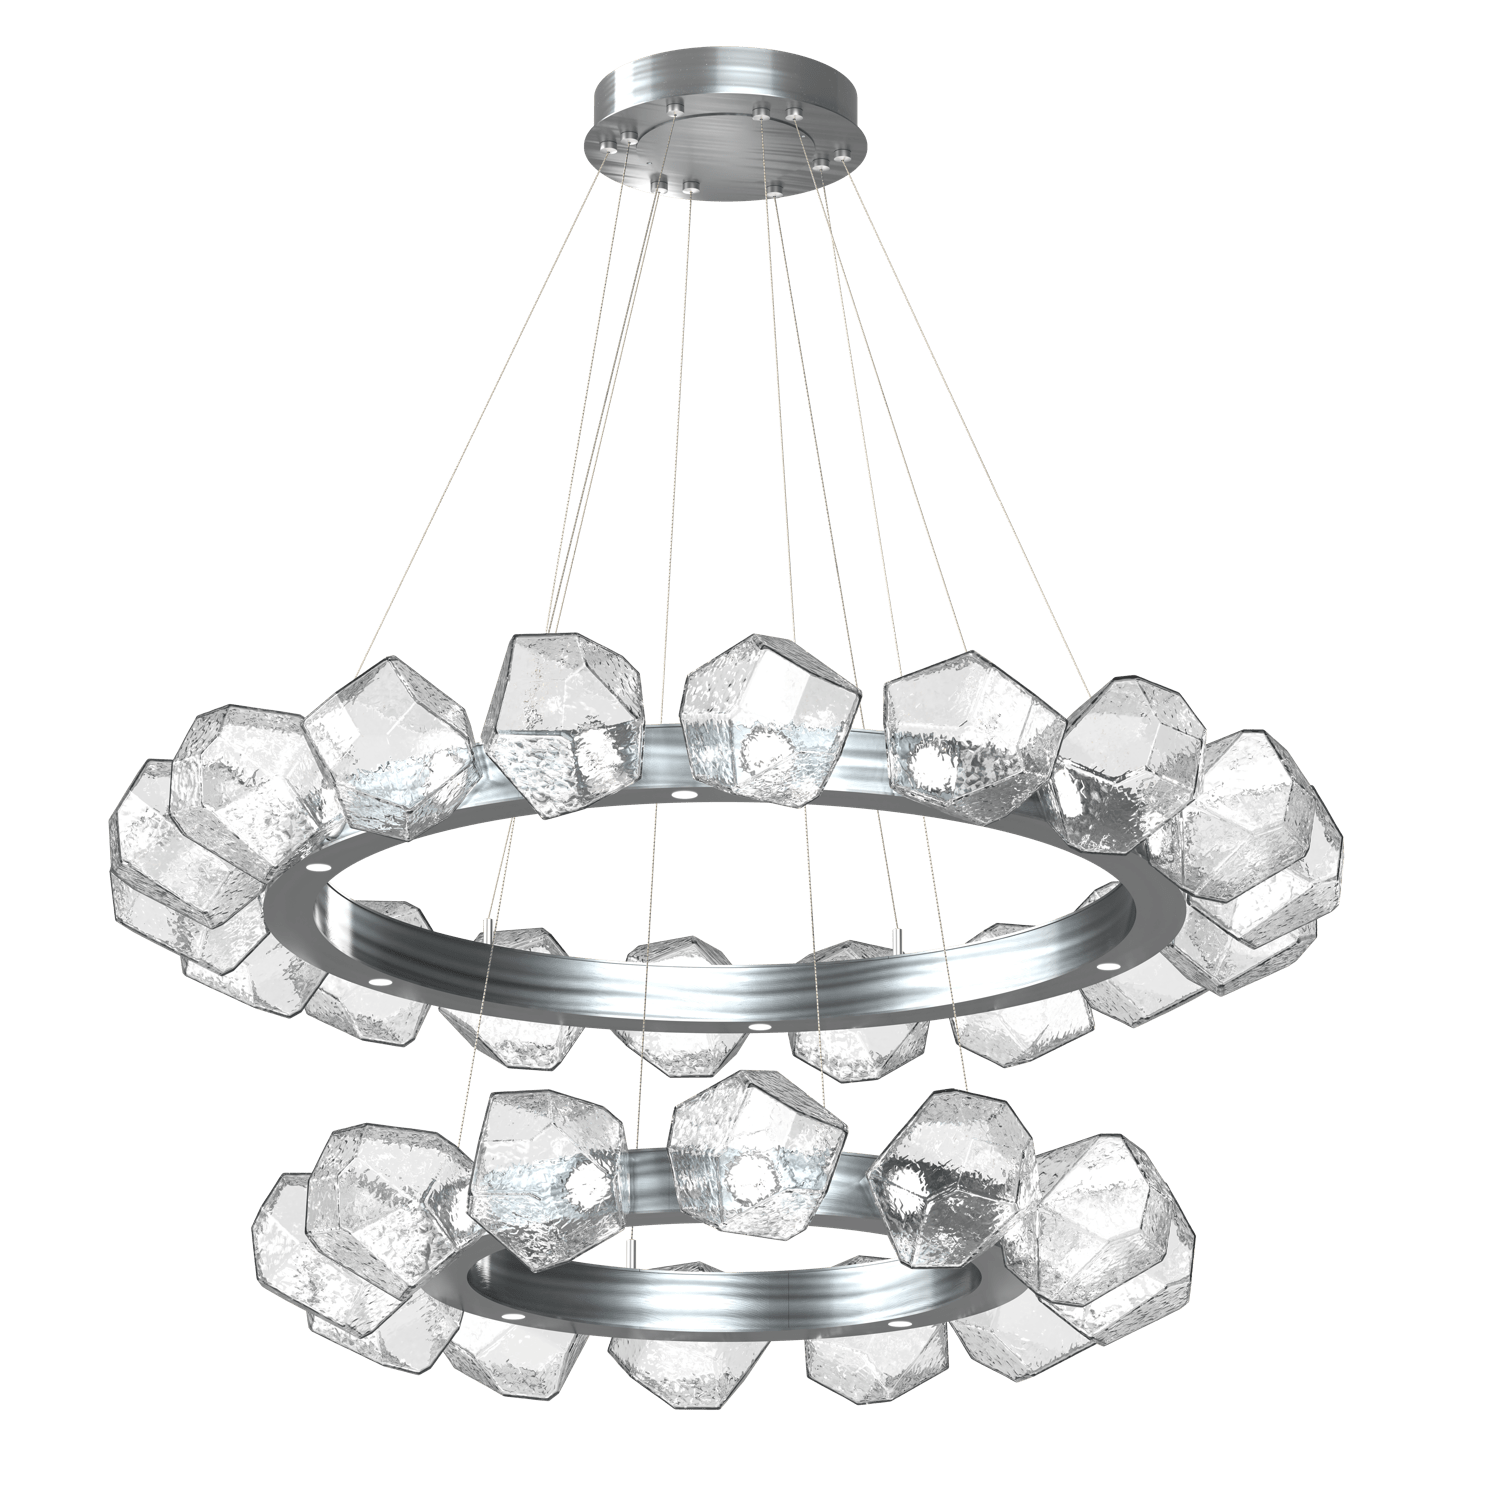 CHB0039-2T-SN-C-Hammerton-Studio-Gem-48-inch-two-tier-radial-ring-chandelier-with-satin-nickel-finish-and-clear-blown-glass-shades-and-LED-lamping